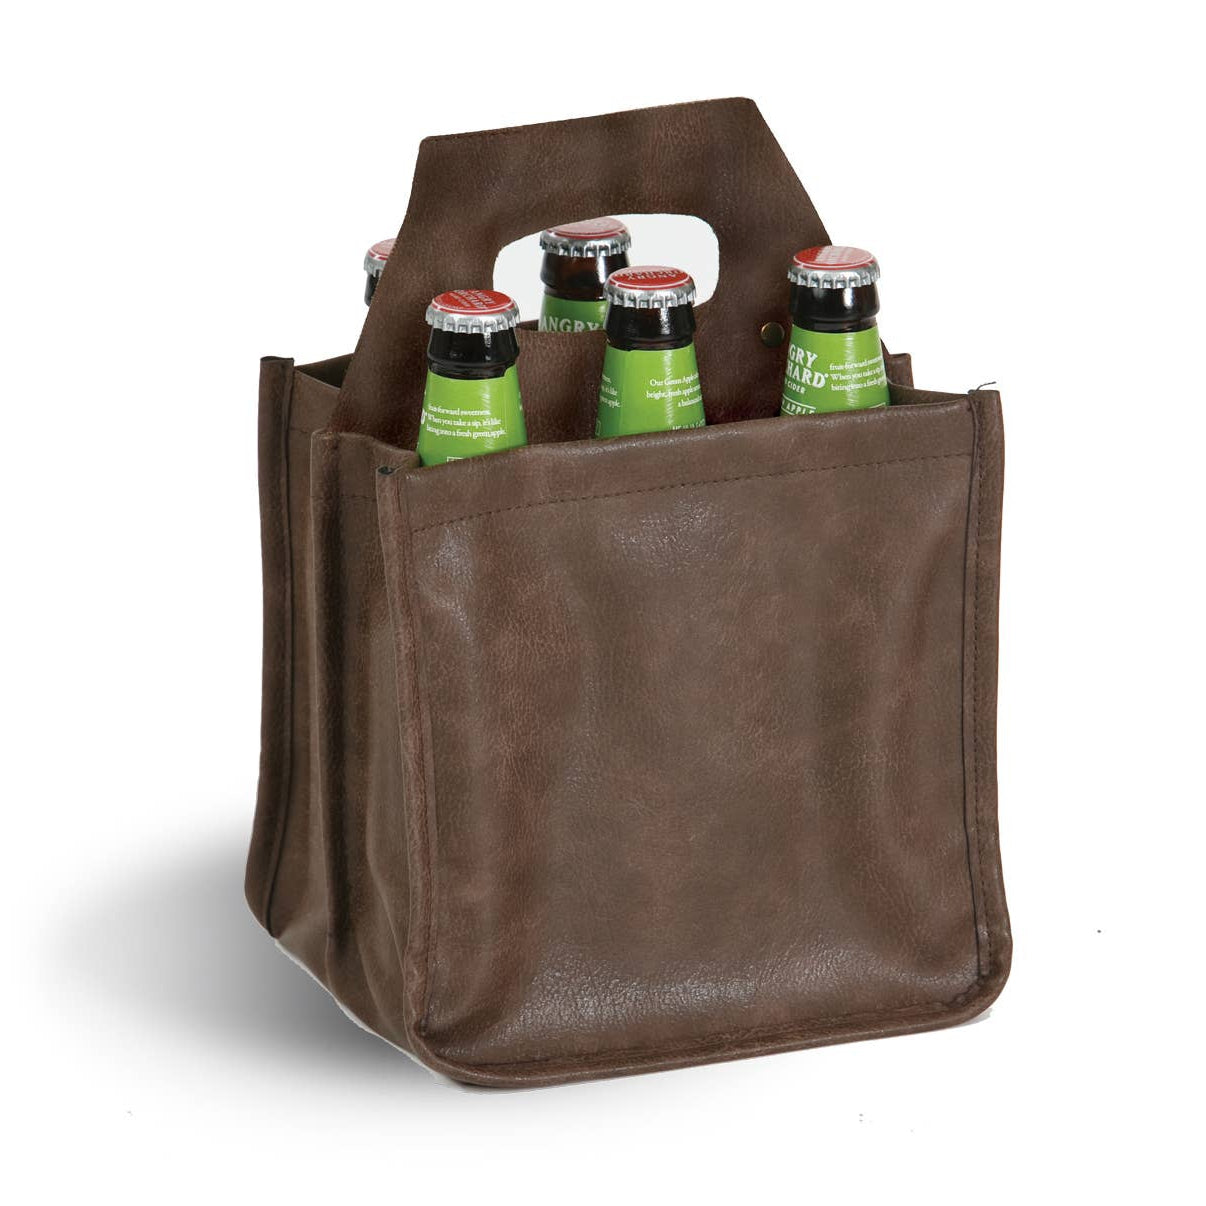 6 Pack Craft Beer Bottle Carrier~ Soft Supple Vegan Leather-Your Private Bar